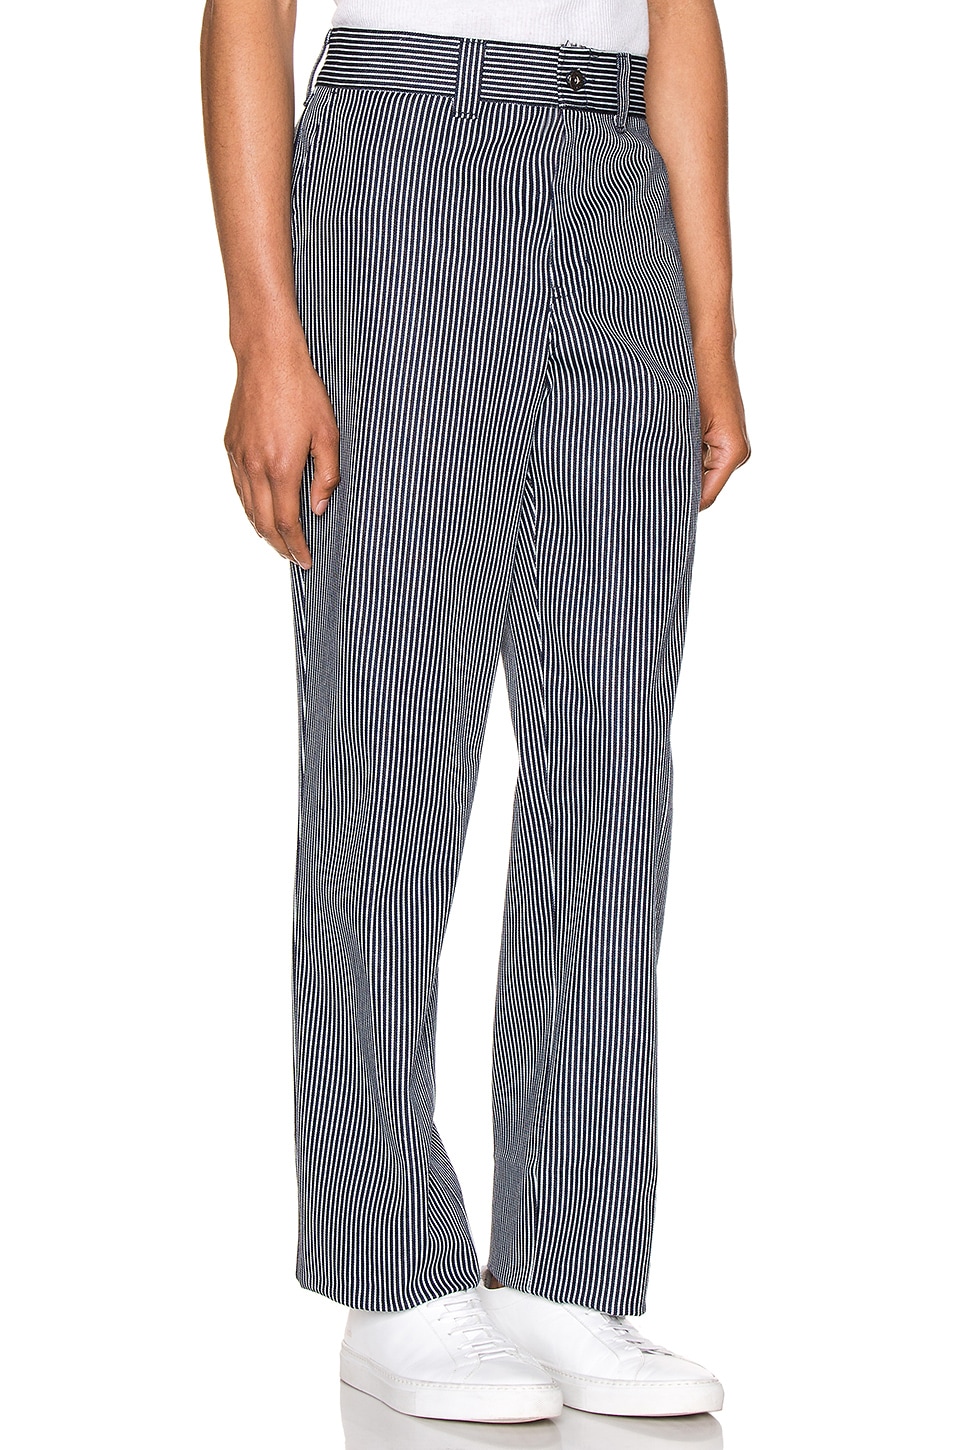 Dickies '67 Slim Fit Twill Hickory Stripe Pant in Hickory Stripe | REVOLVE